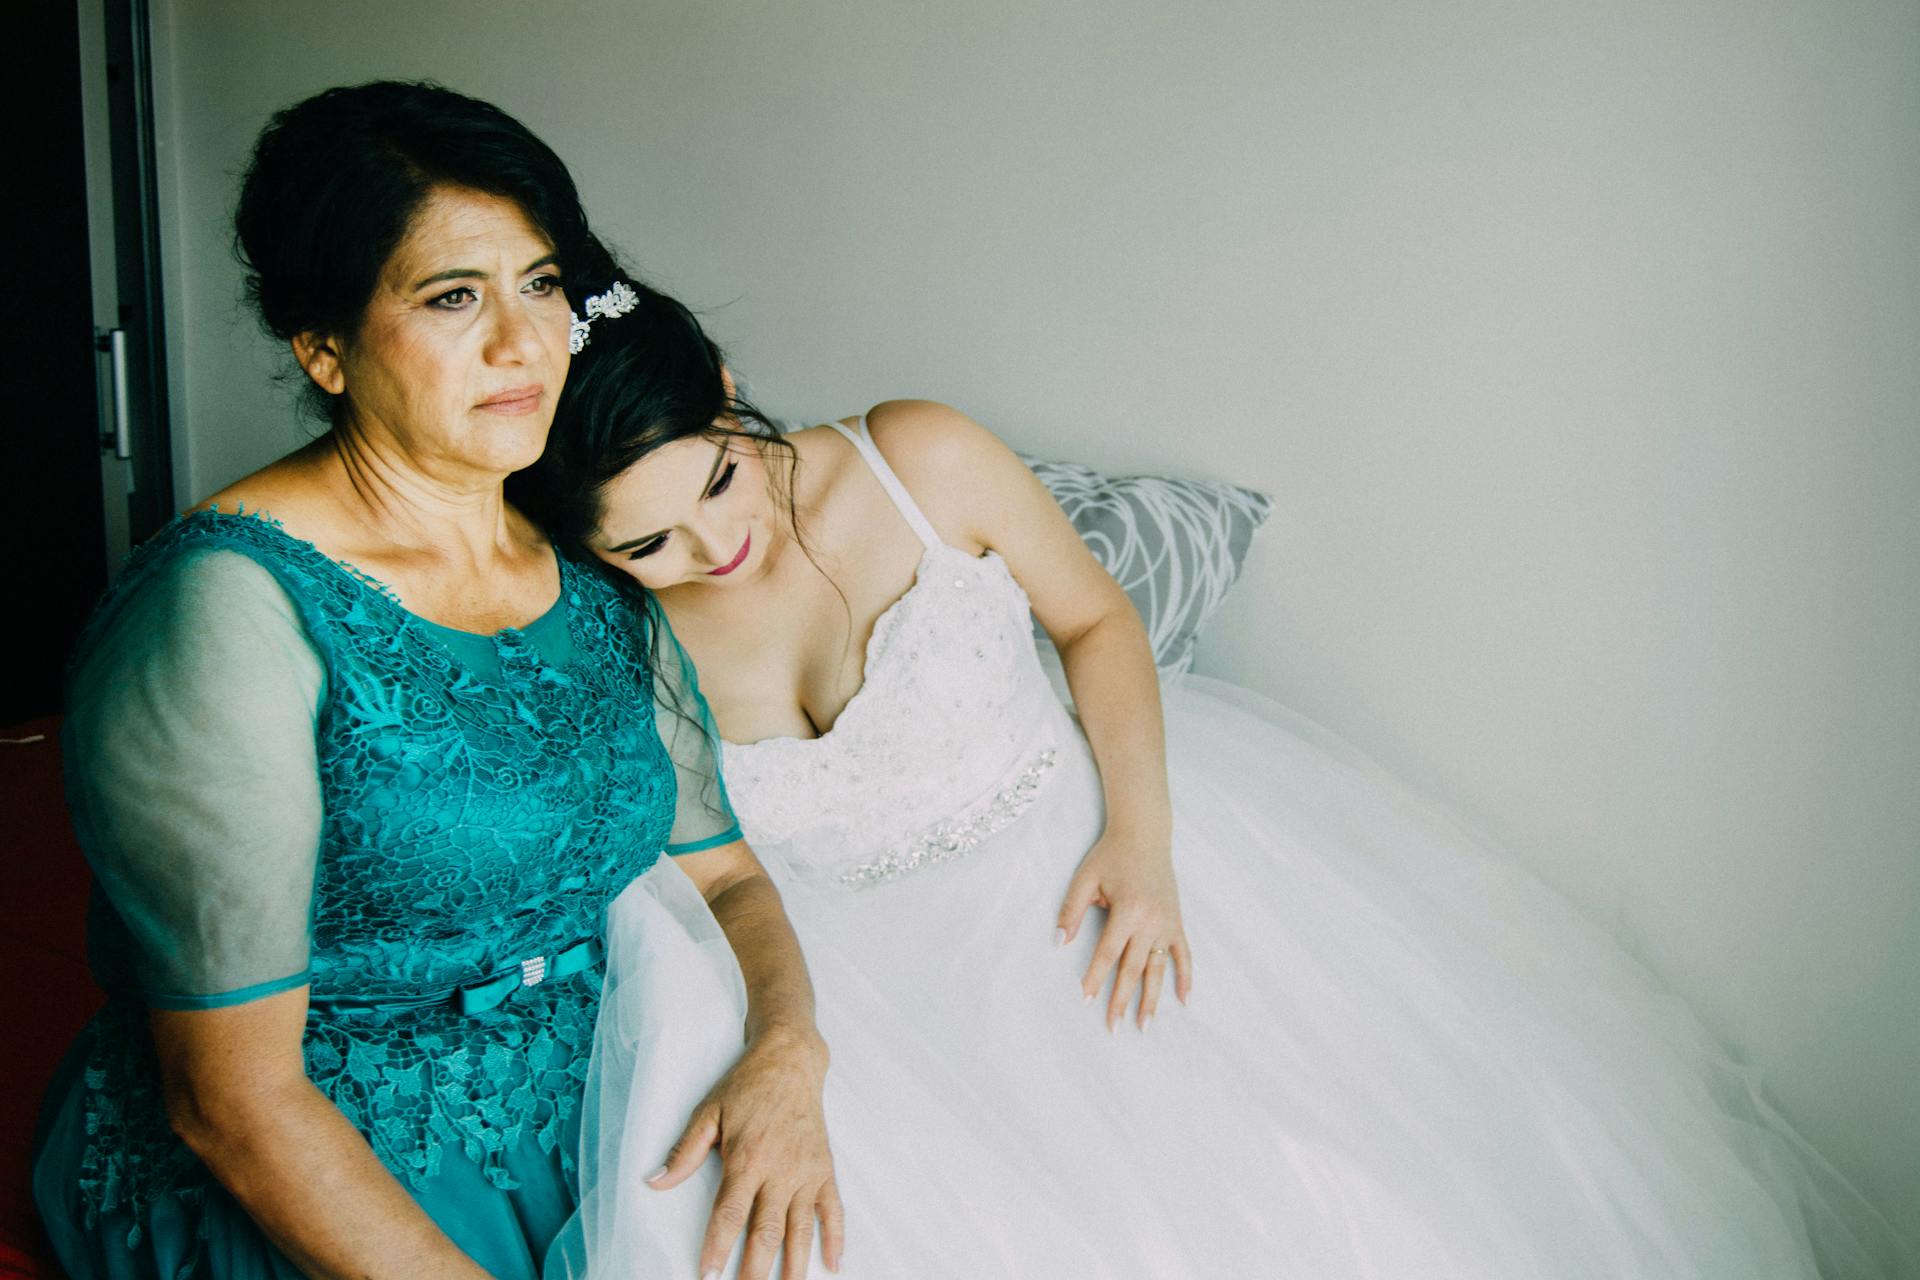 A bride leaning on an older woman | Source: Pexels